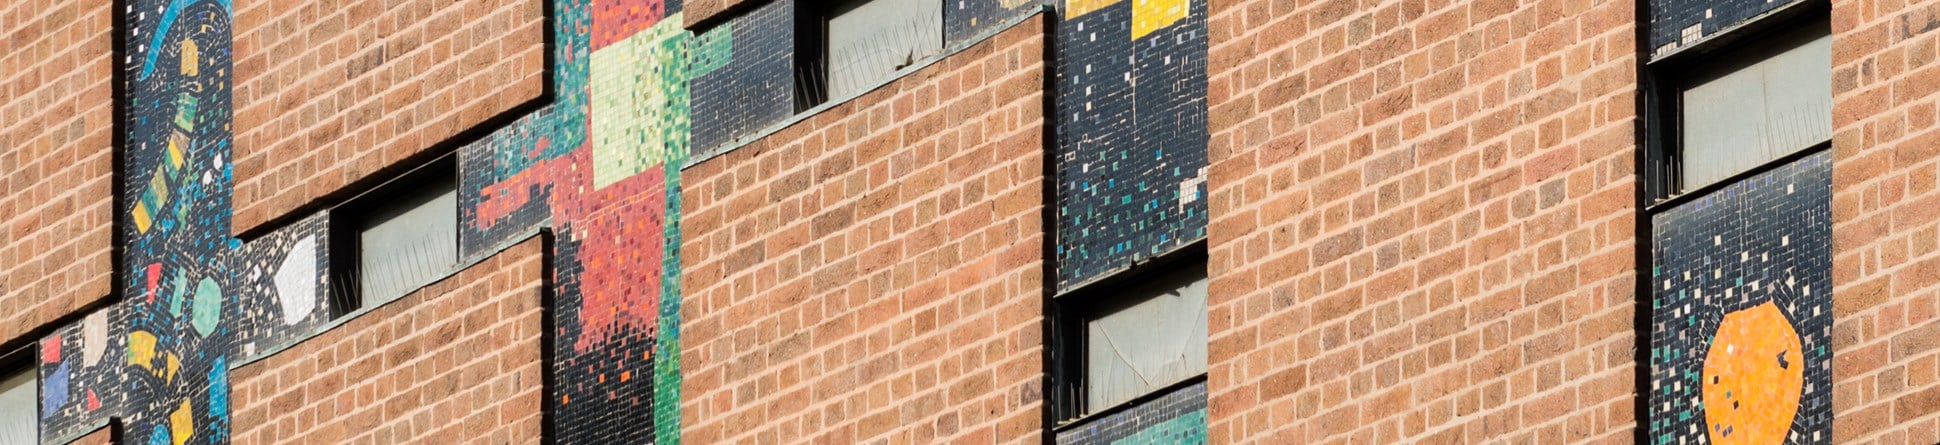 Locarno dancehall (now City Library), Smithford Way, Coventry. Exterior detail of coloured mosaic tiles. © Historic England